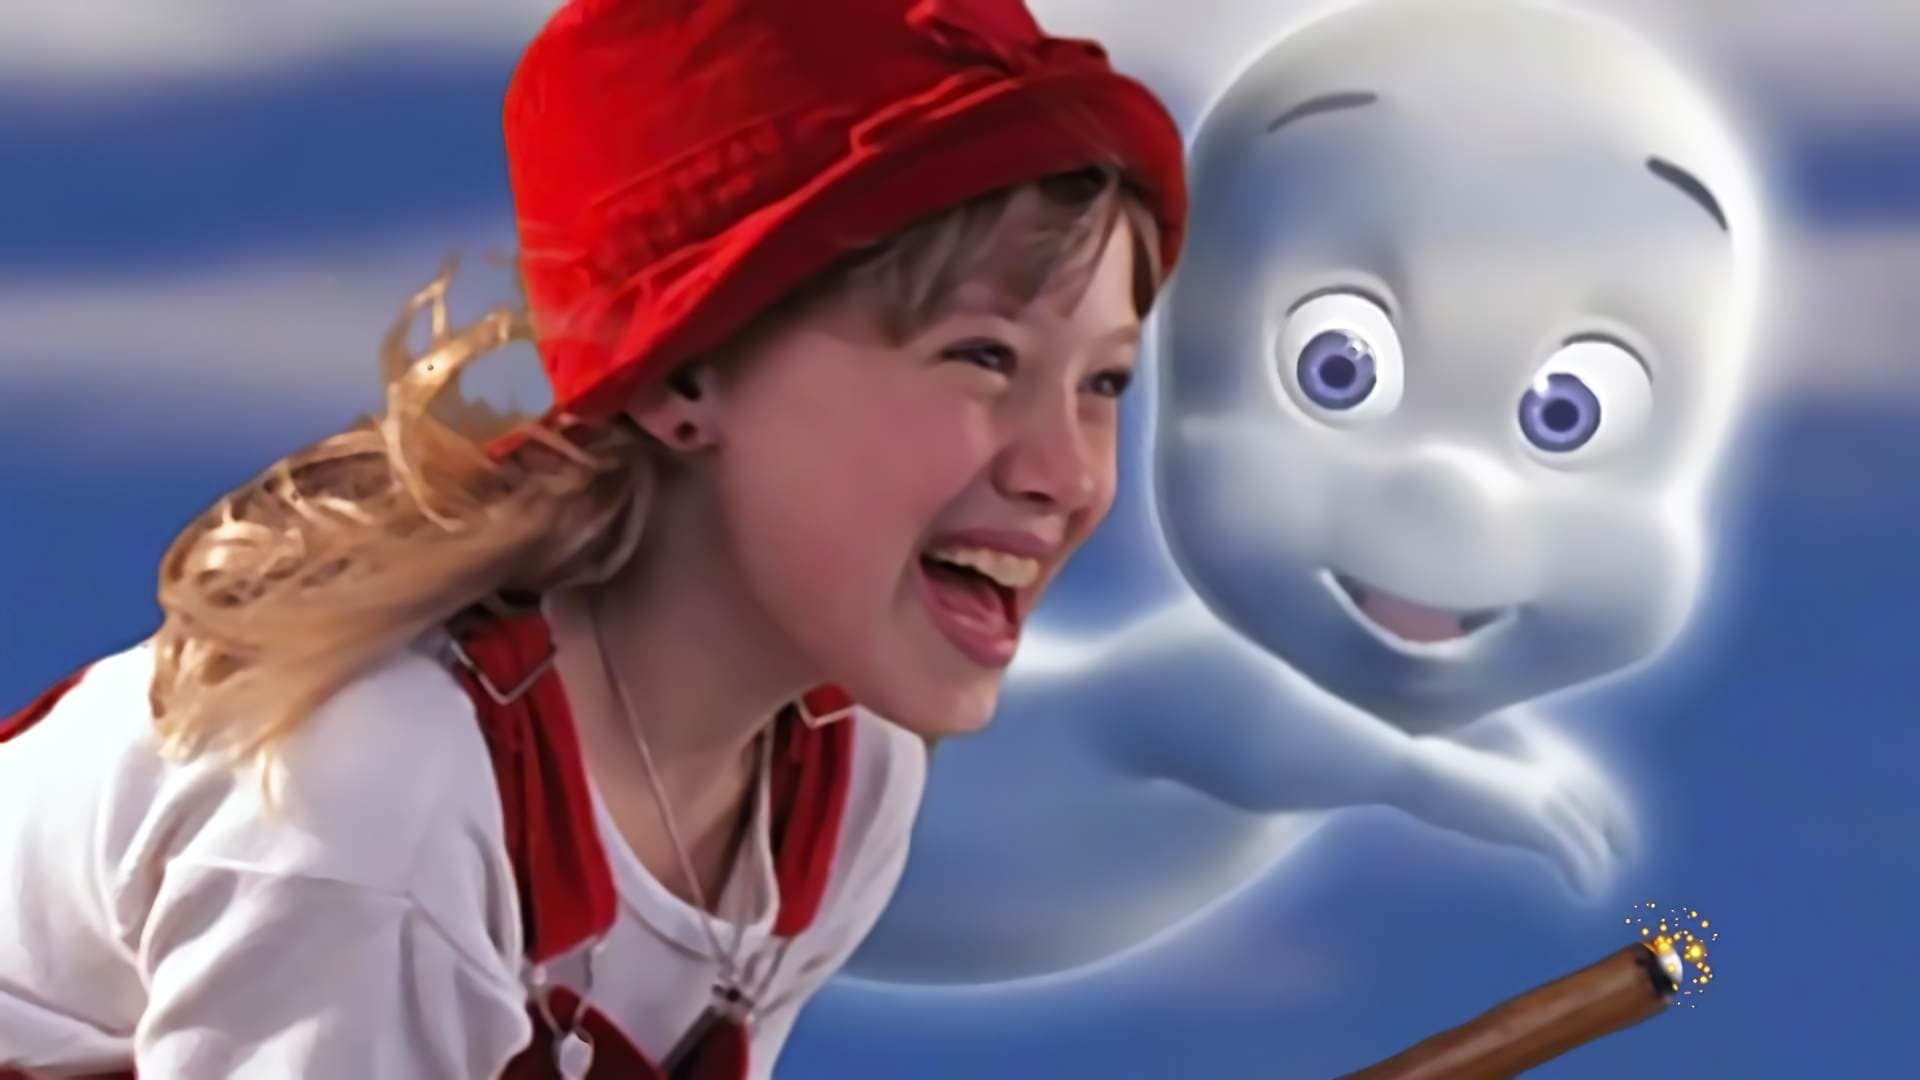 Casper and wendy french torrent - vsacontrol